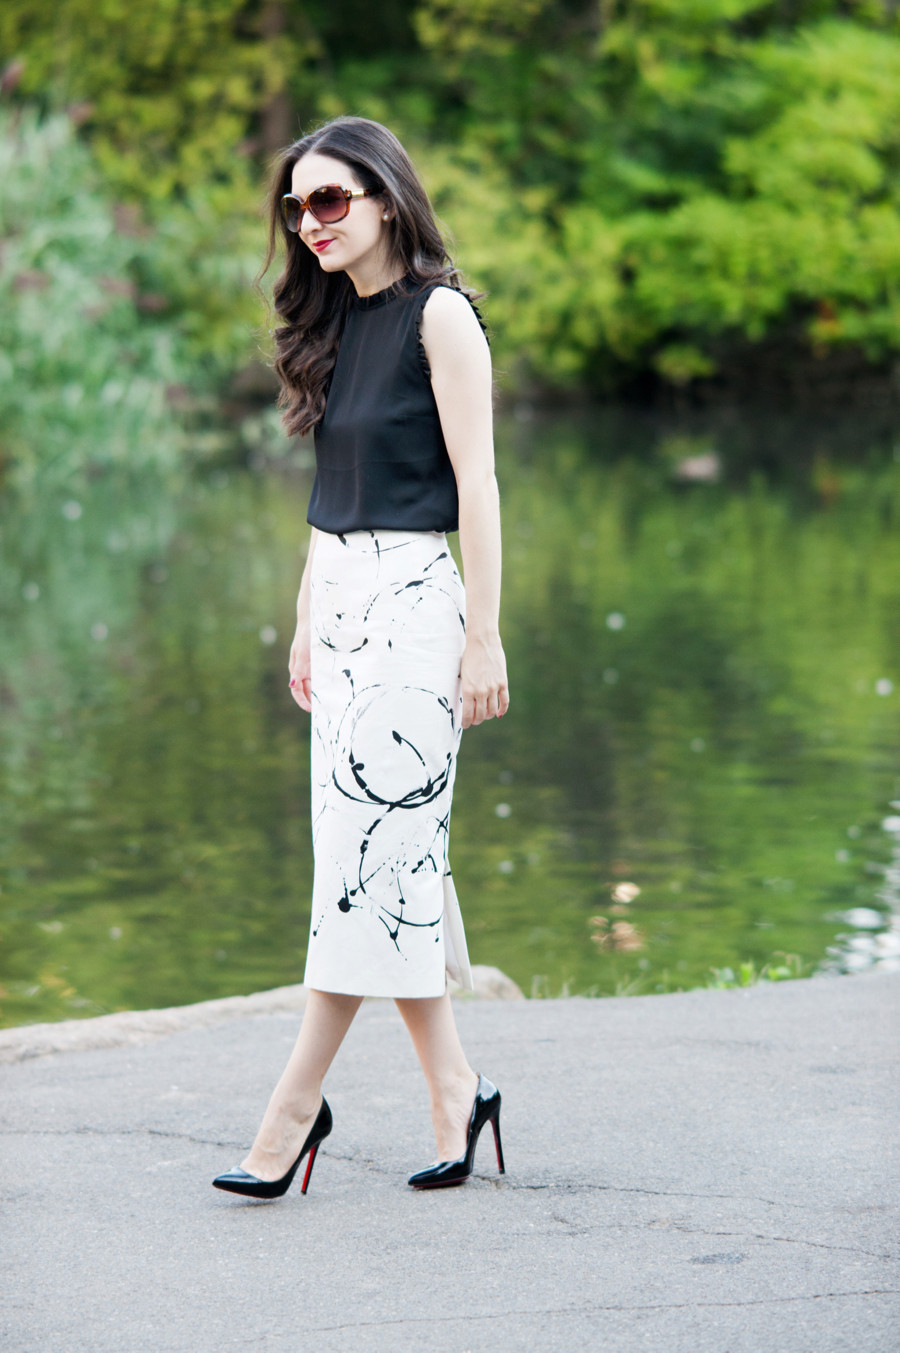 Lafayette skirt, koton blouse, lafayette print skirt, black and white outfit, work outfit, summer work look, summer work outfit, black and white work outfit, louboutin pigalle, pigalle 120 mm, pigalle heels